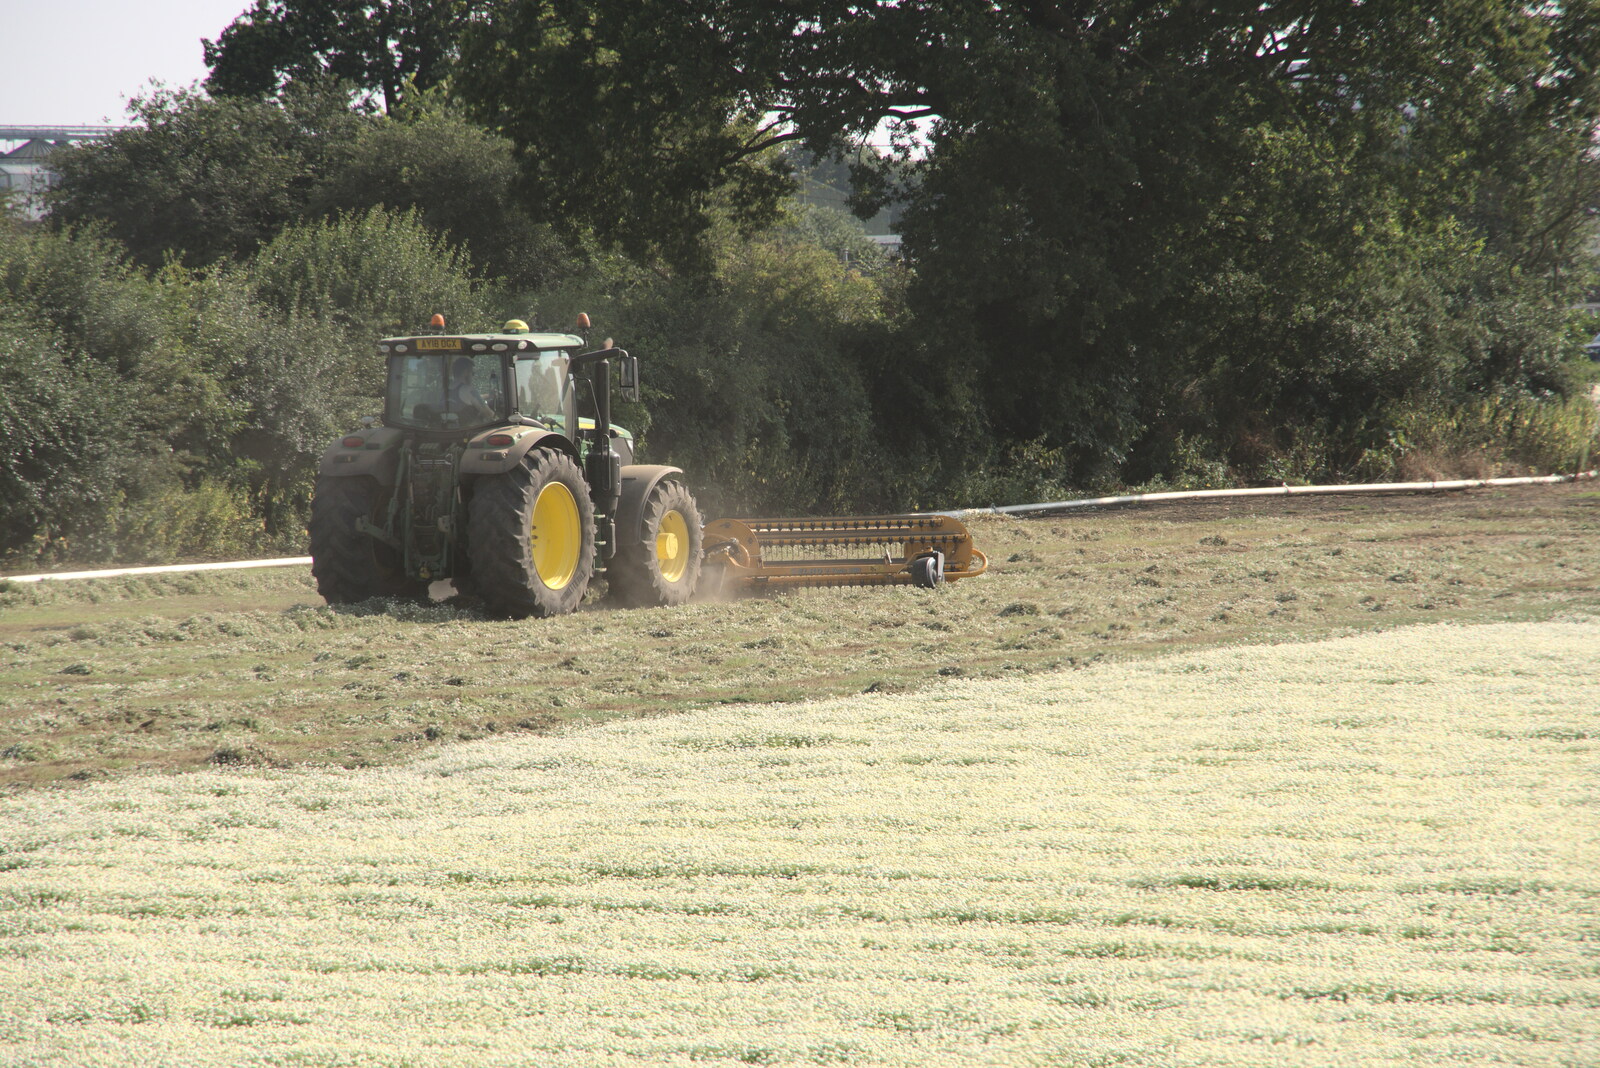 More chamomile harvesting from The BSCC at The Crown, Gissing, Norfolk - 22nd July 2021